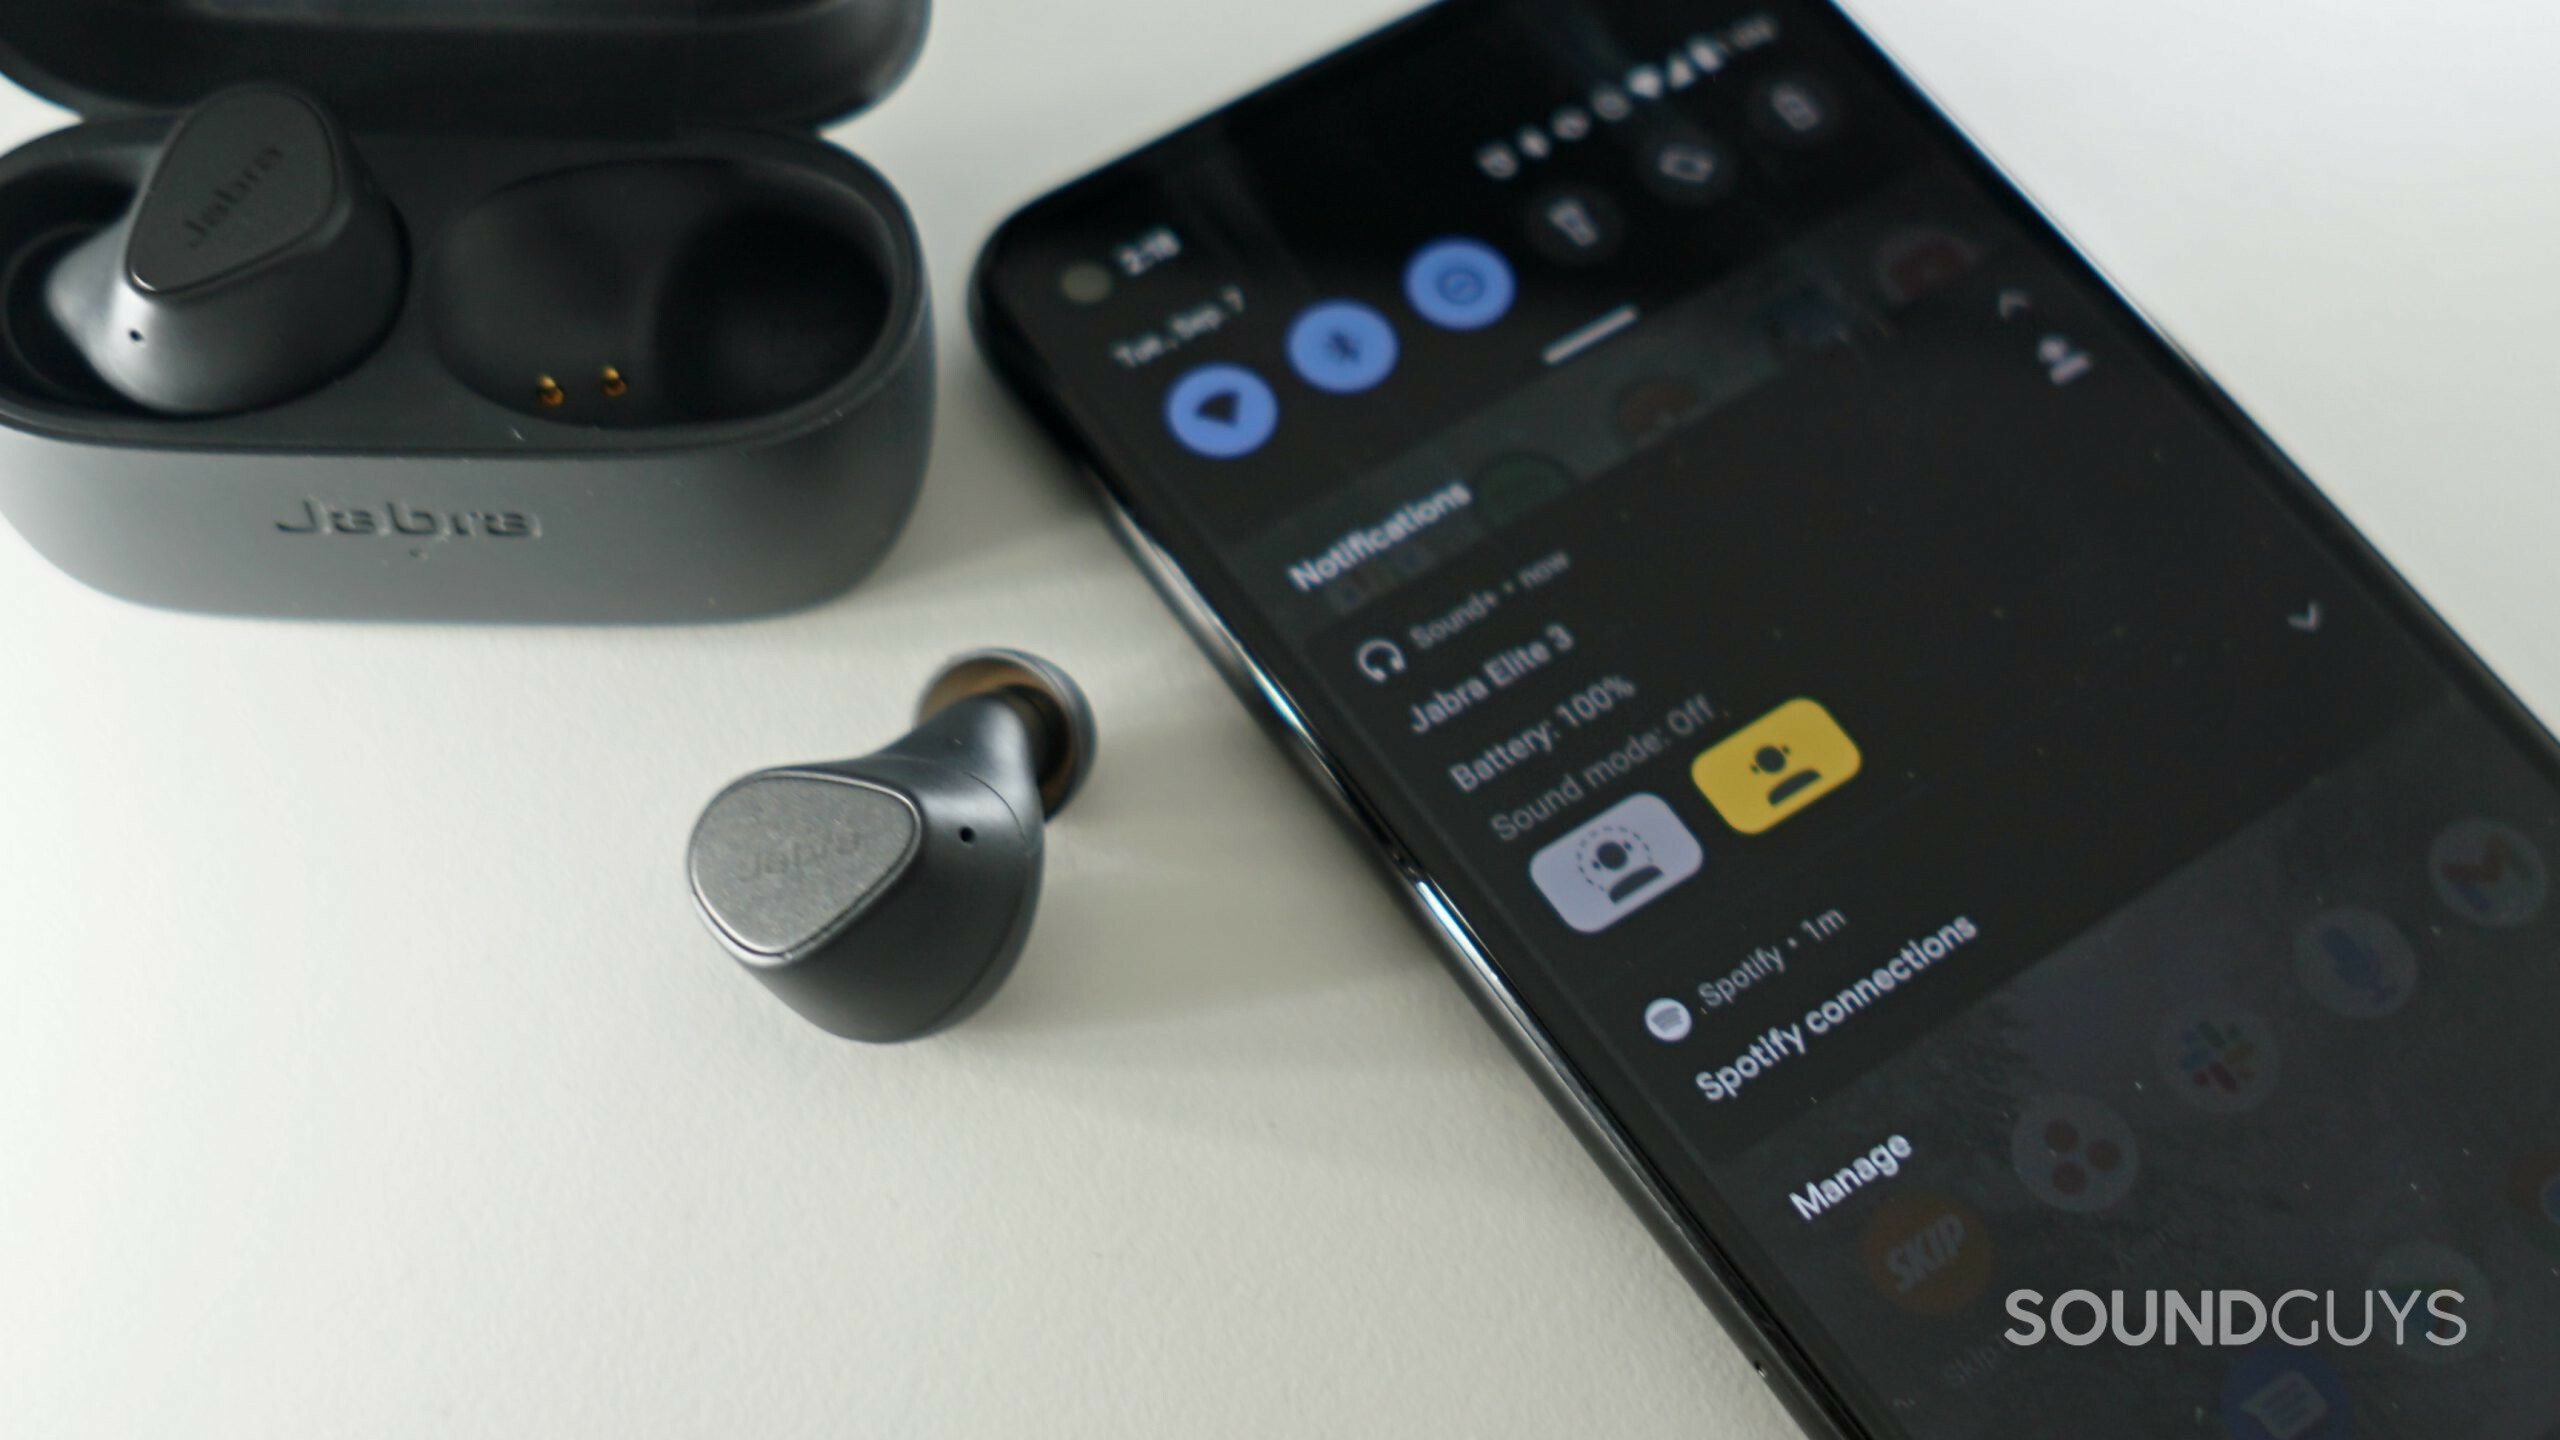 Jabra Elite 3 review: Keeping the basics intact for less